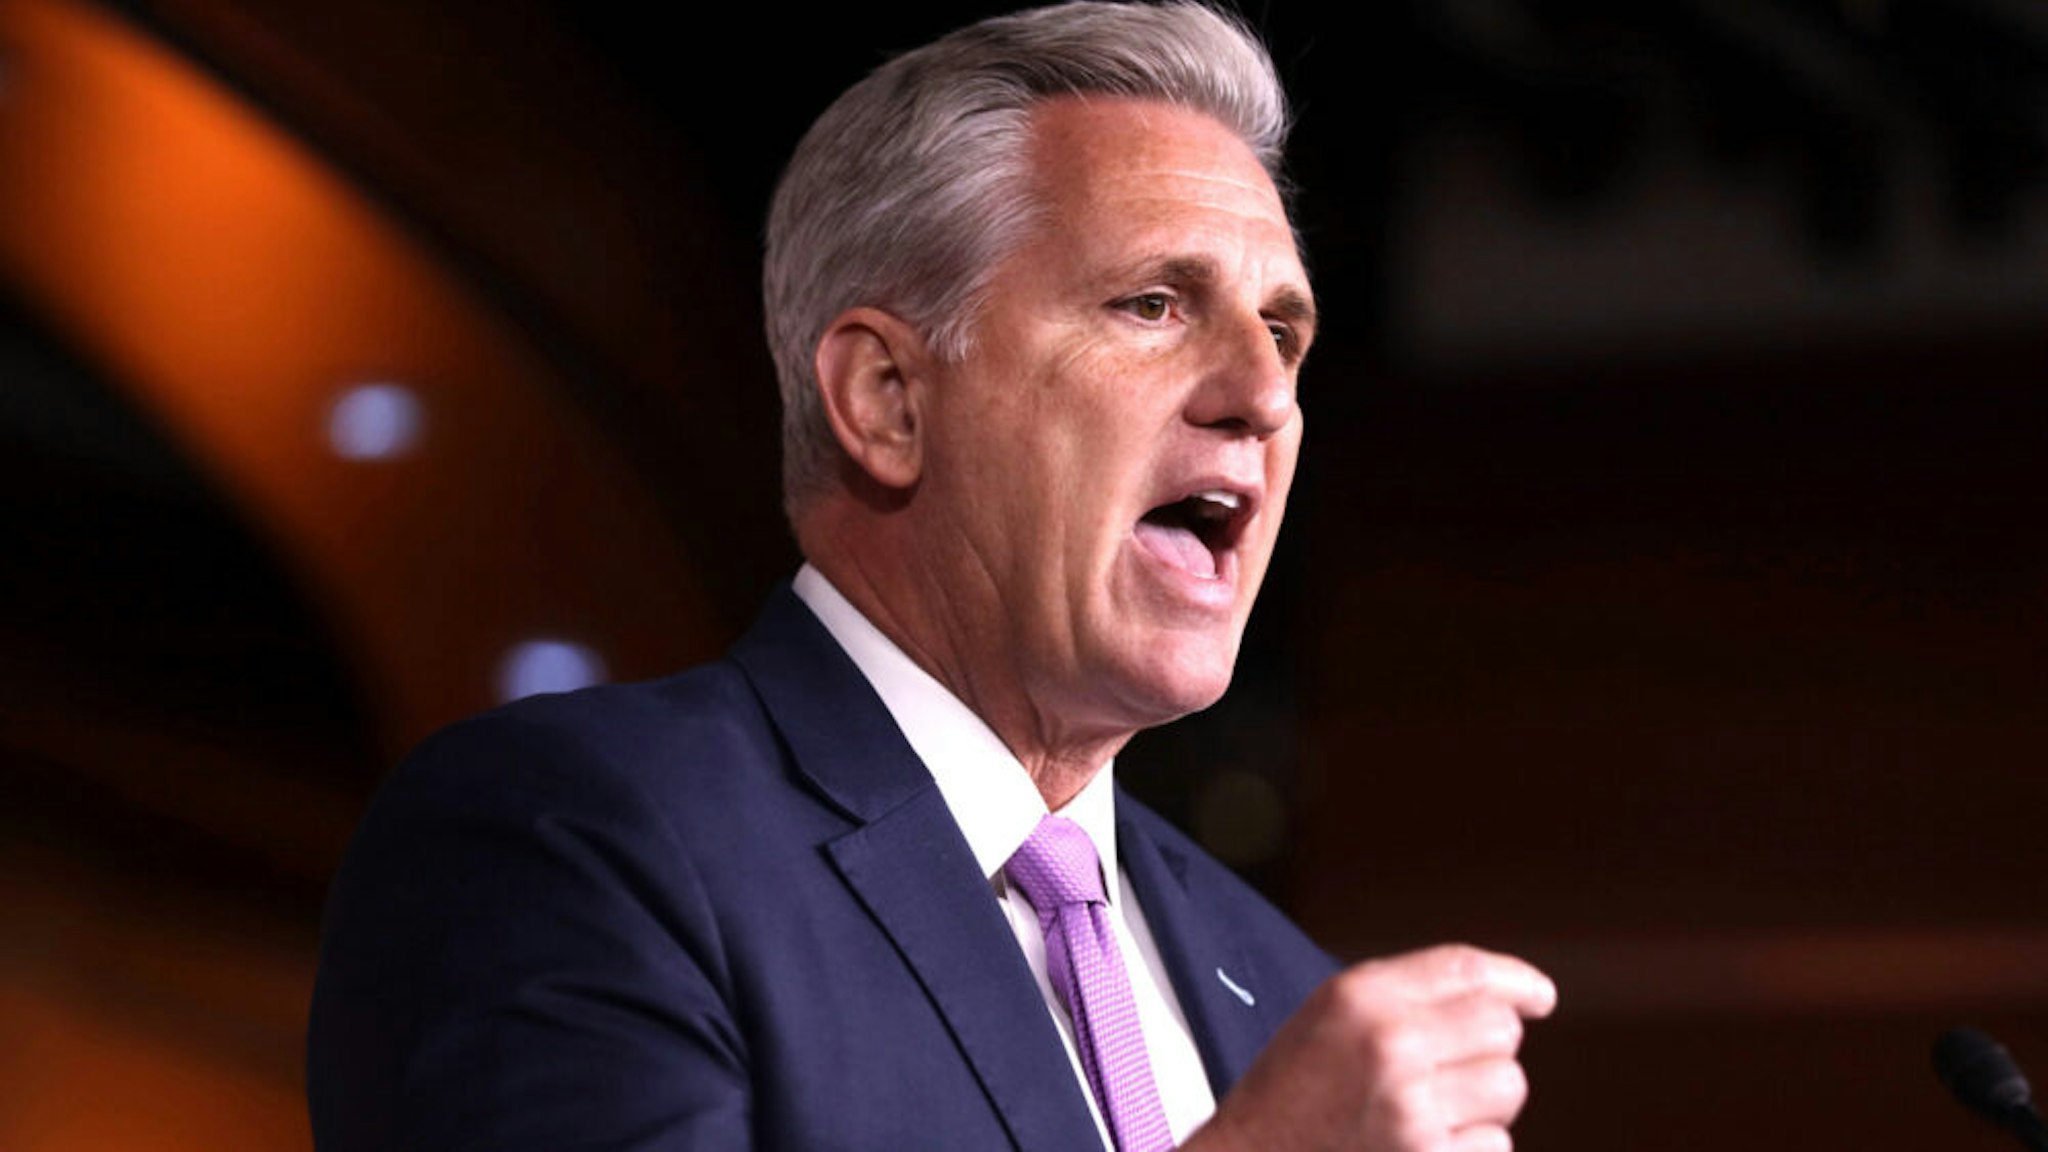 WASHINGTON, DC - DECEMBER 05: U.S. House Minority Leader Rep. Kevin McCarthy (R-CA) speaks during his weekly news conference December 5, 2019 on Capitol Hill in Washington, DC. McCarthy discussed the impeachment inquiry against President Donald Trump.